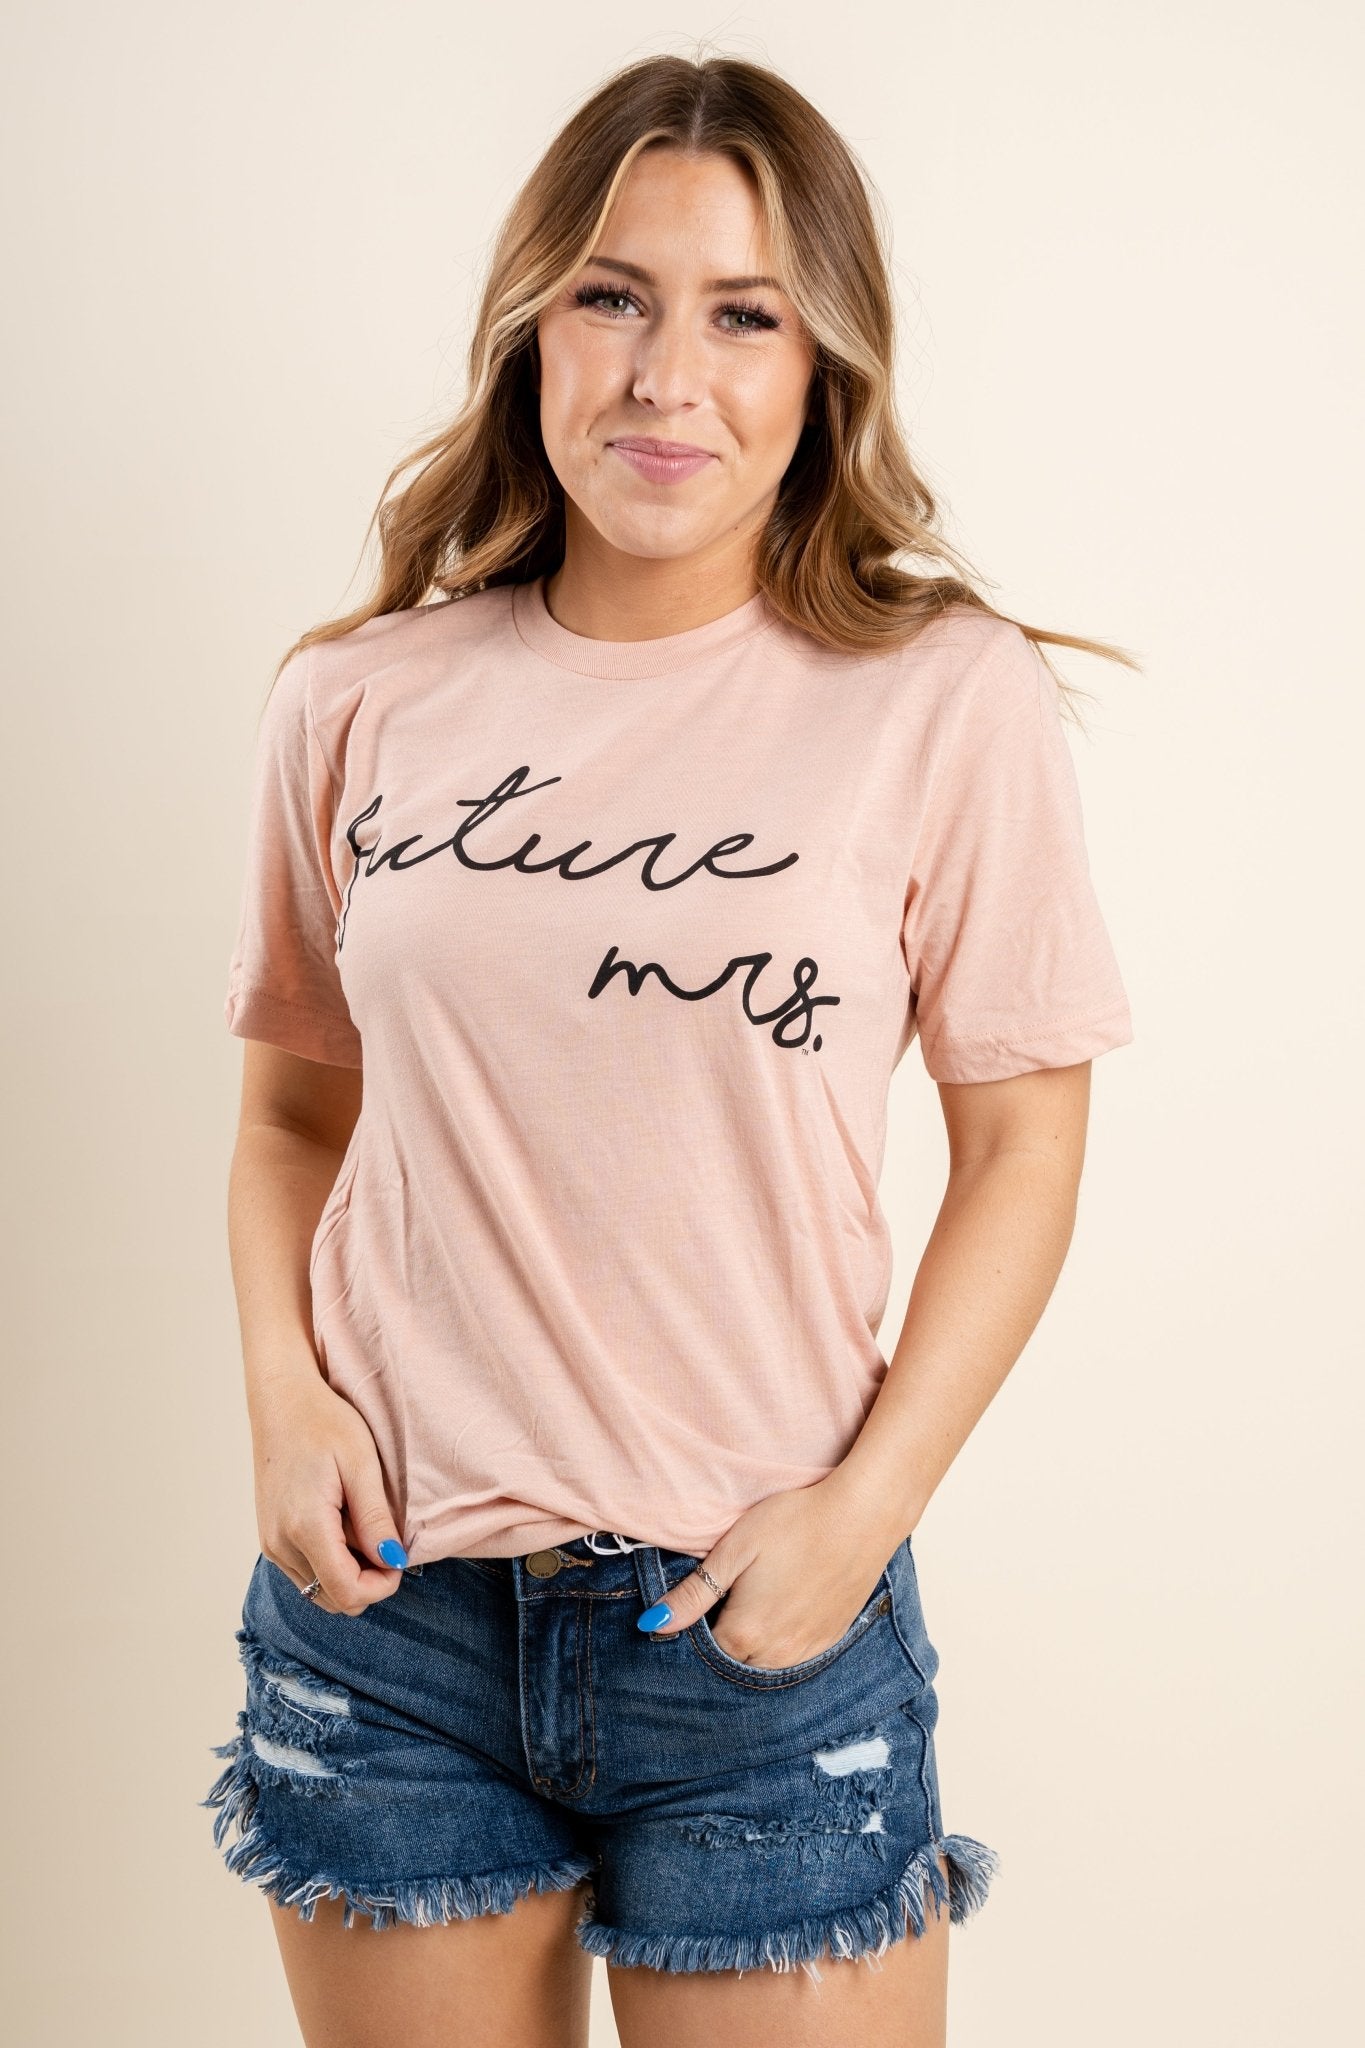 Future Mrs unisex short sleeve t-shirt peach - Stylish T-shirts - Trendy Graphic T-Shirts and Tank Tops at Lush Fashion Lounge Boutique in Oklahoma City